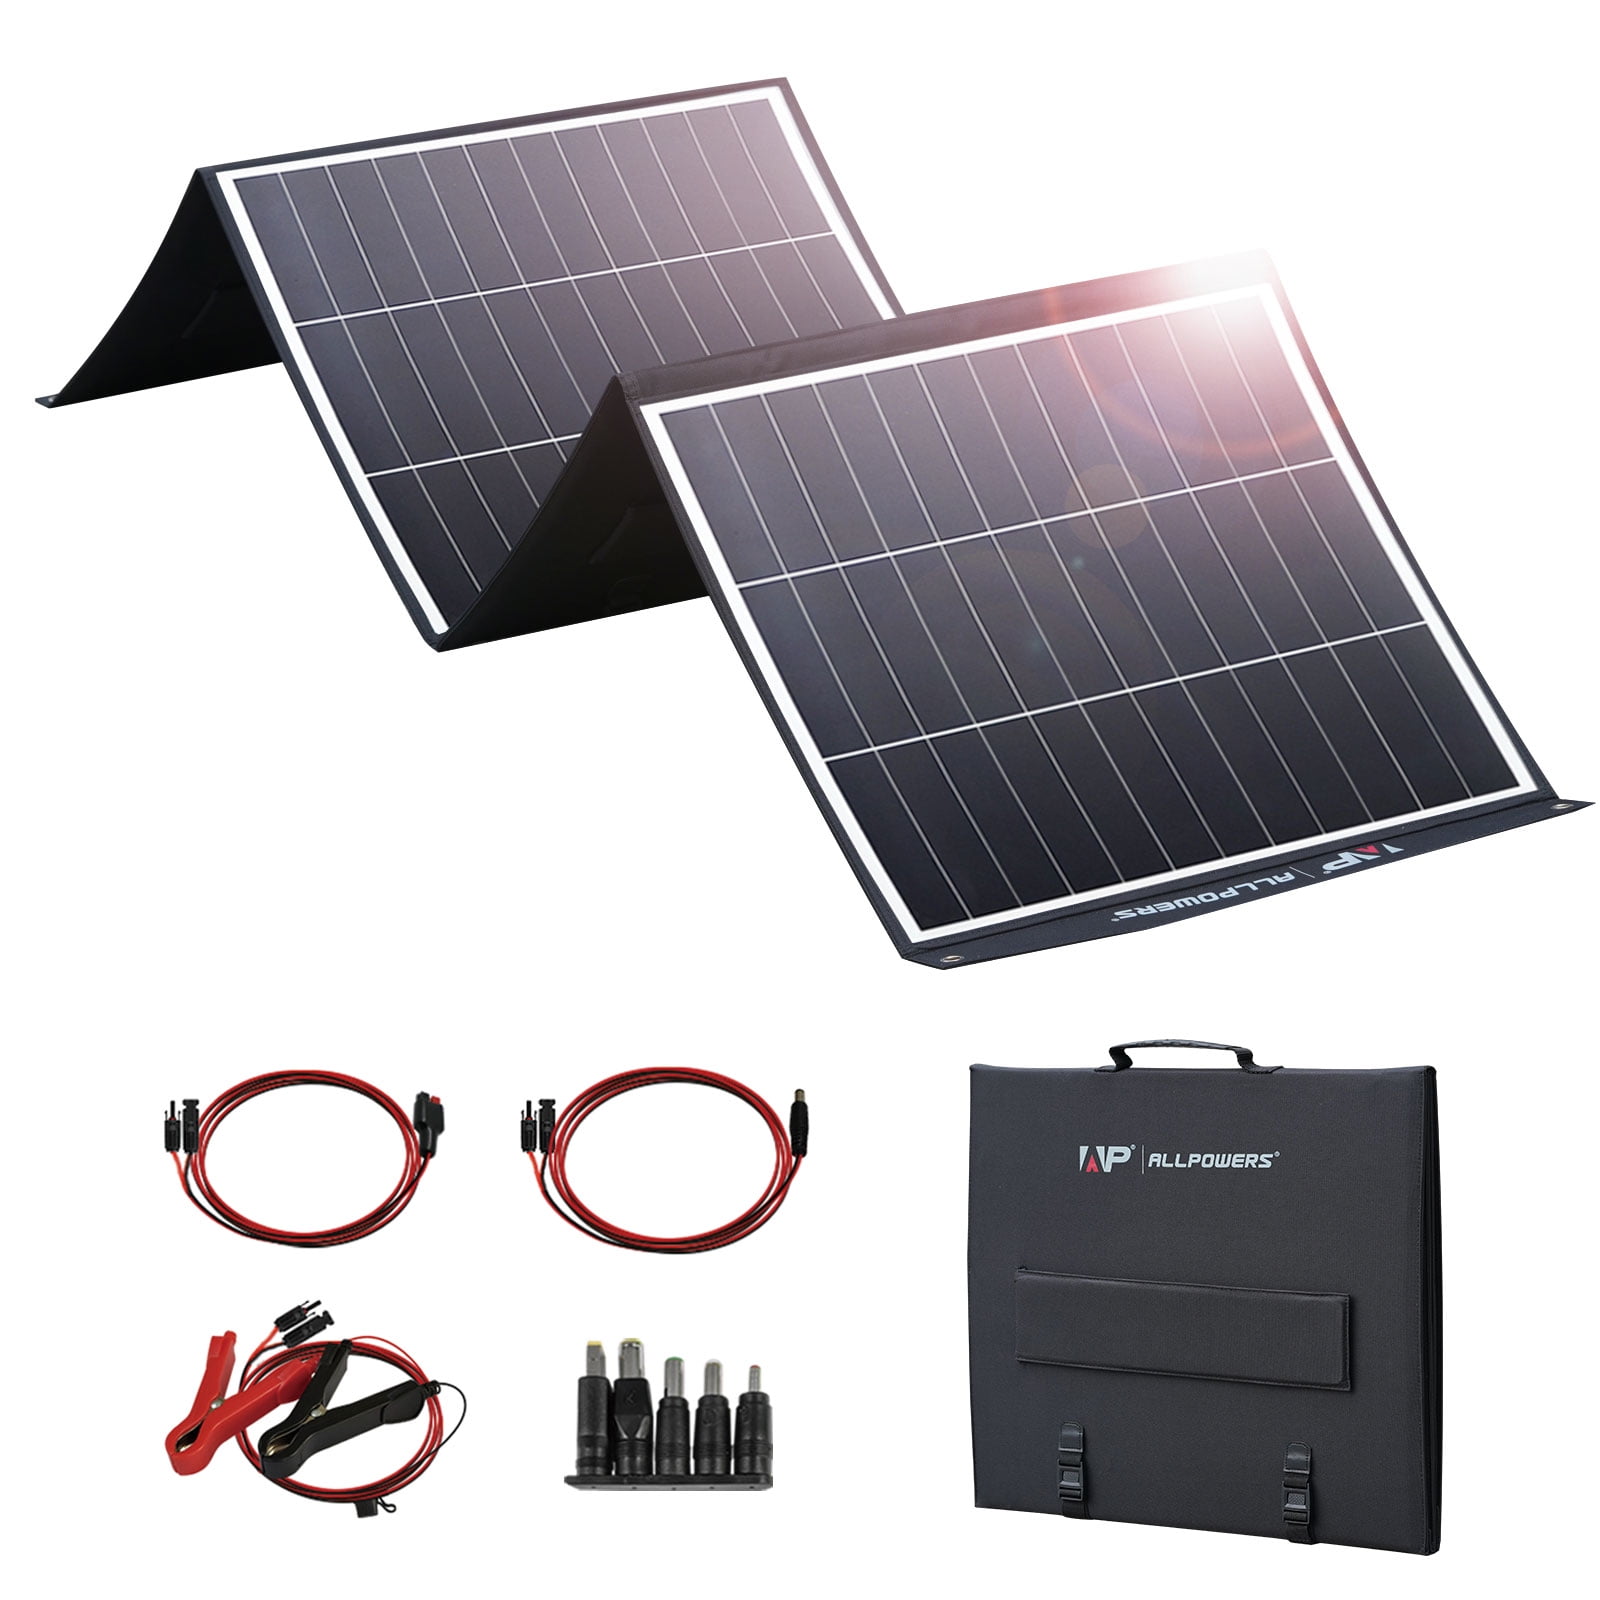 ALLPOWERS 200W Foldable Solar Panel Kit for Camping, with MC-4 Output and  Adjustable Kickstand, Monocrystalline Solar Charger for Power